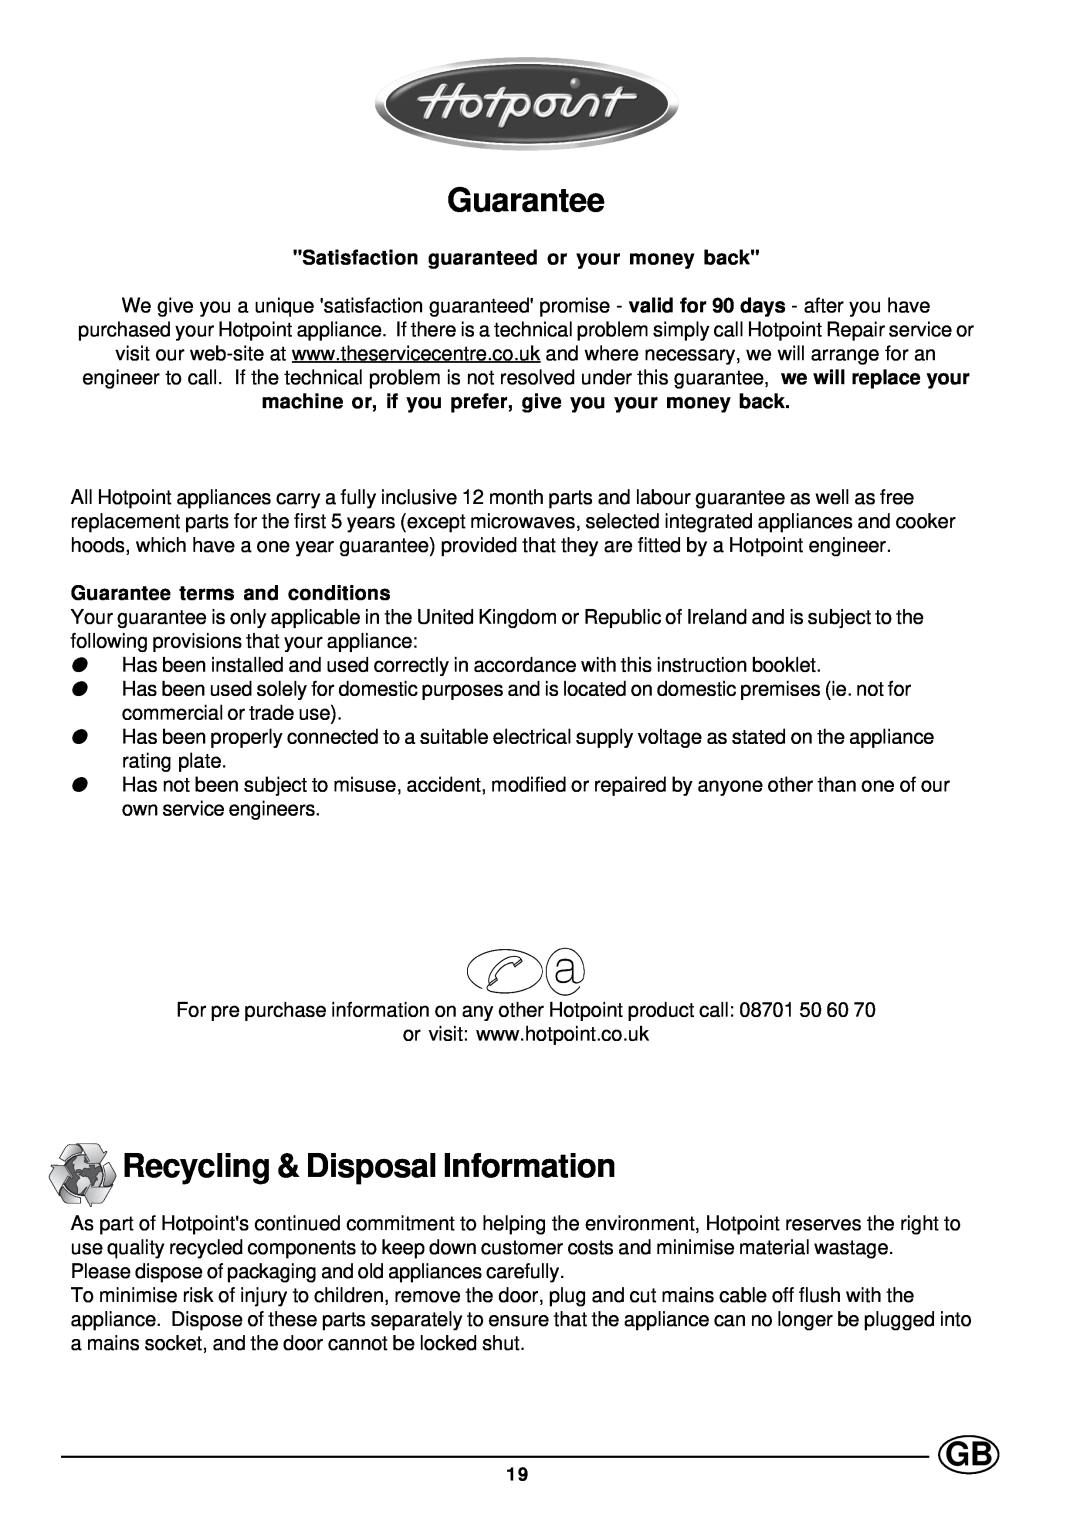 Hotpoint ST87X manual Guarantee, Recycling & Disposal Information, Satisfaction guaranteed or your money back 